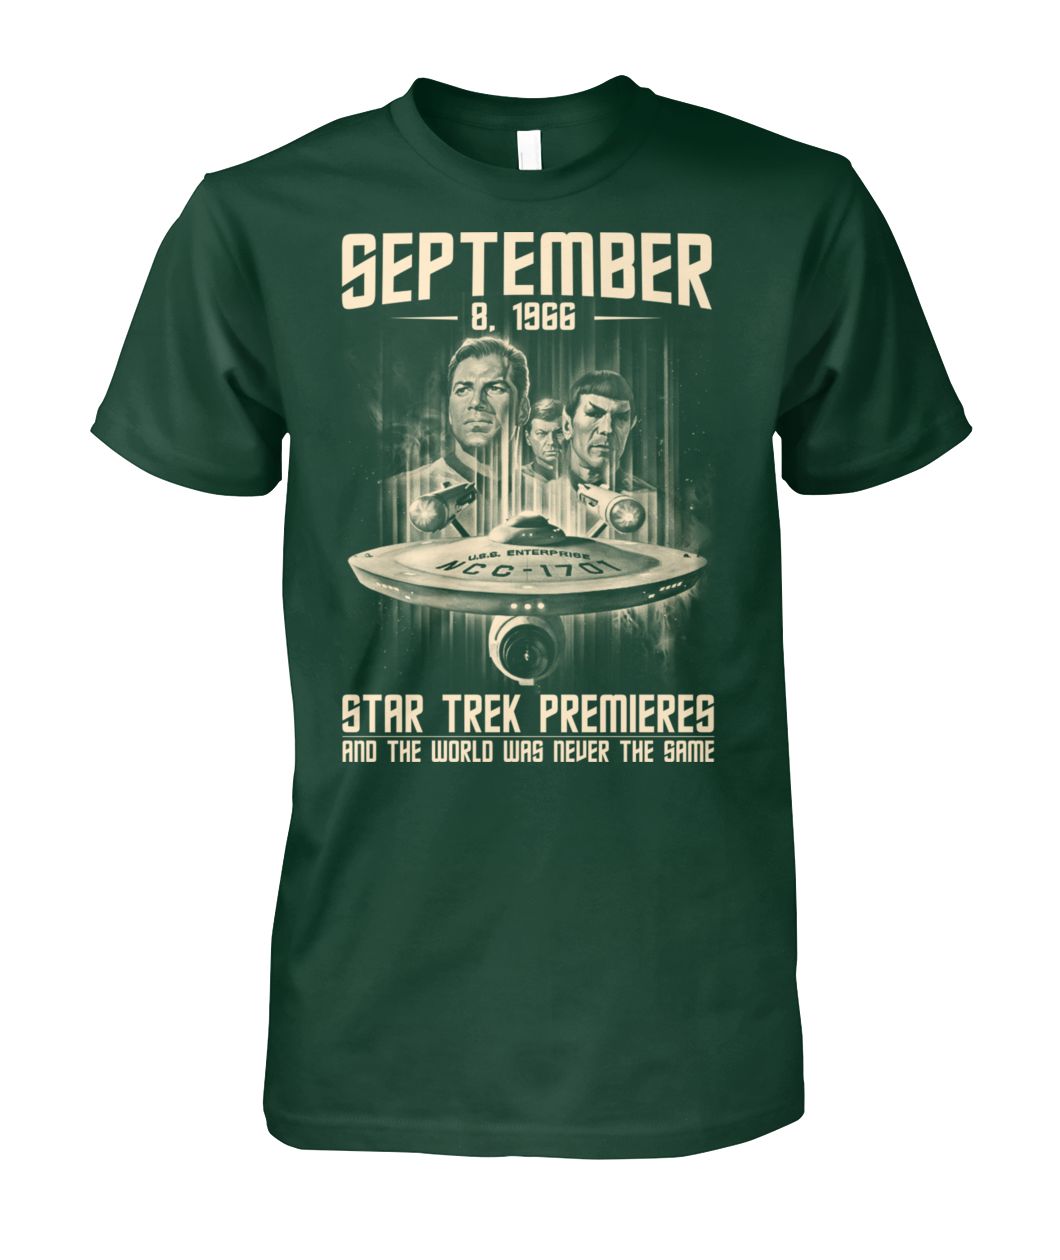 September 8-1966 Star Trek premieres and the world was never the same green shirt